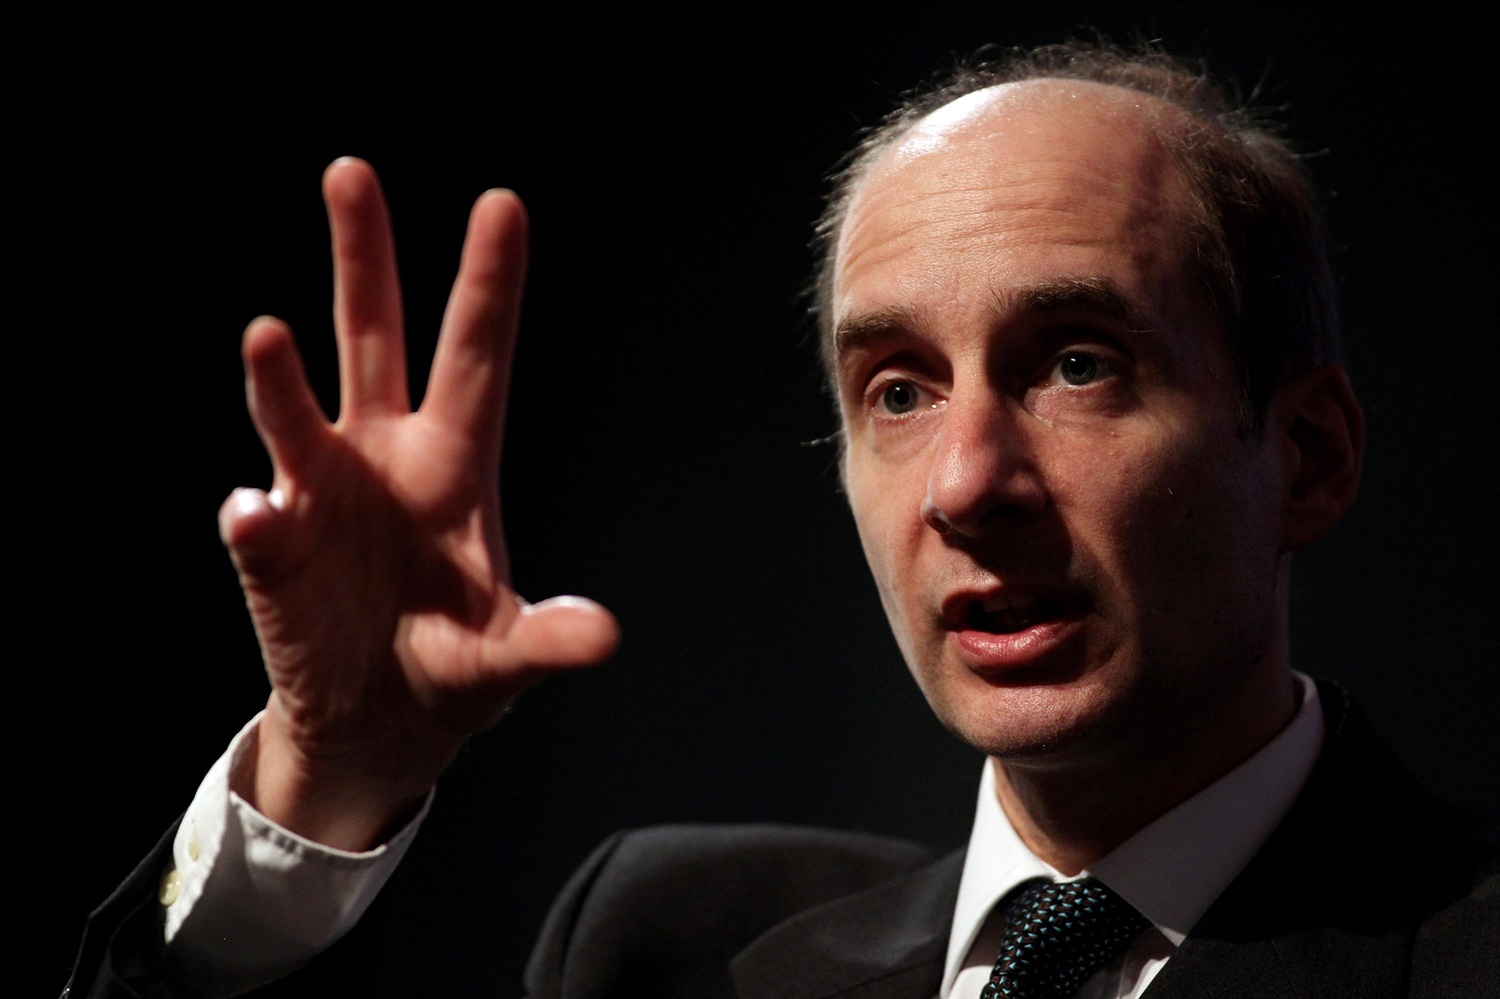 Lord Adonis appointed HS2 board member